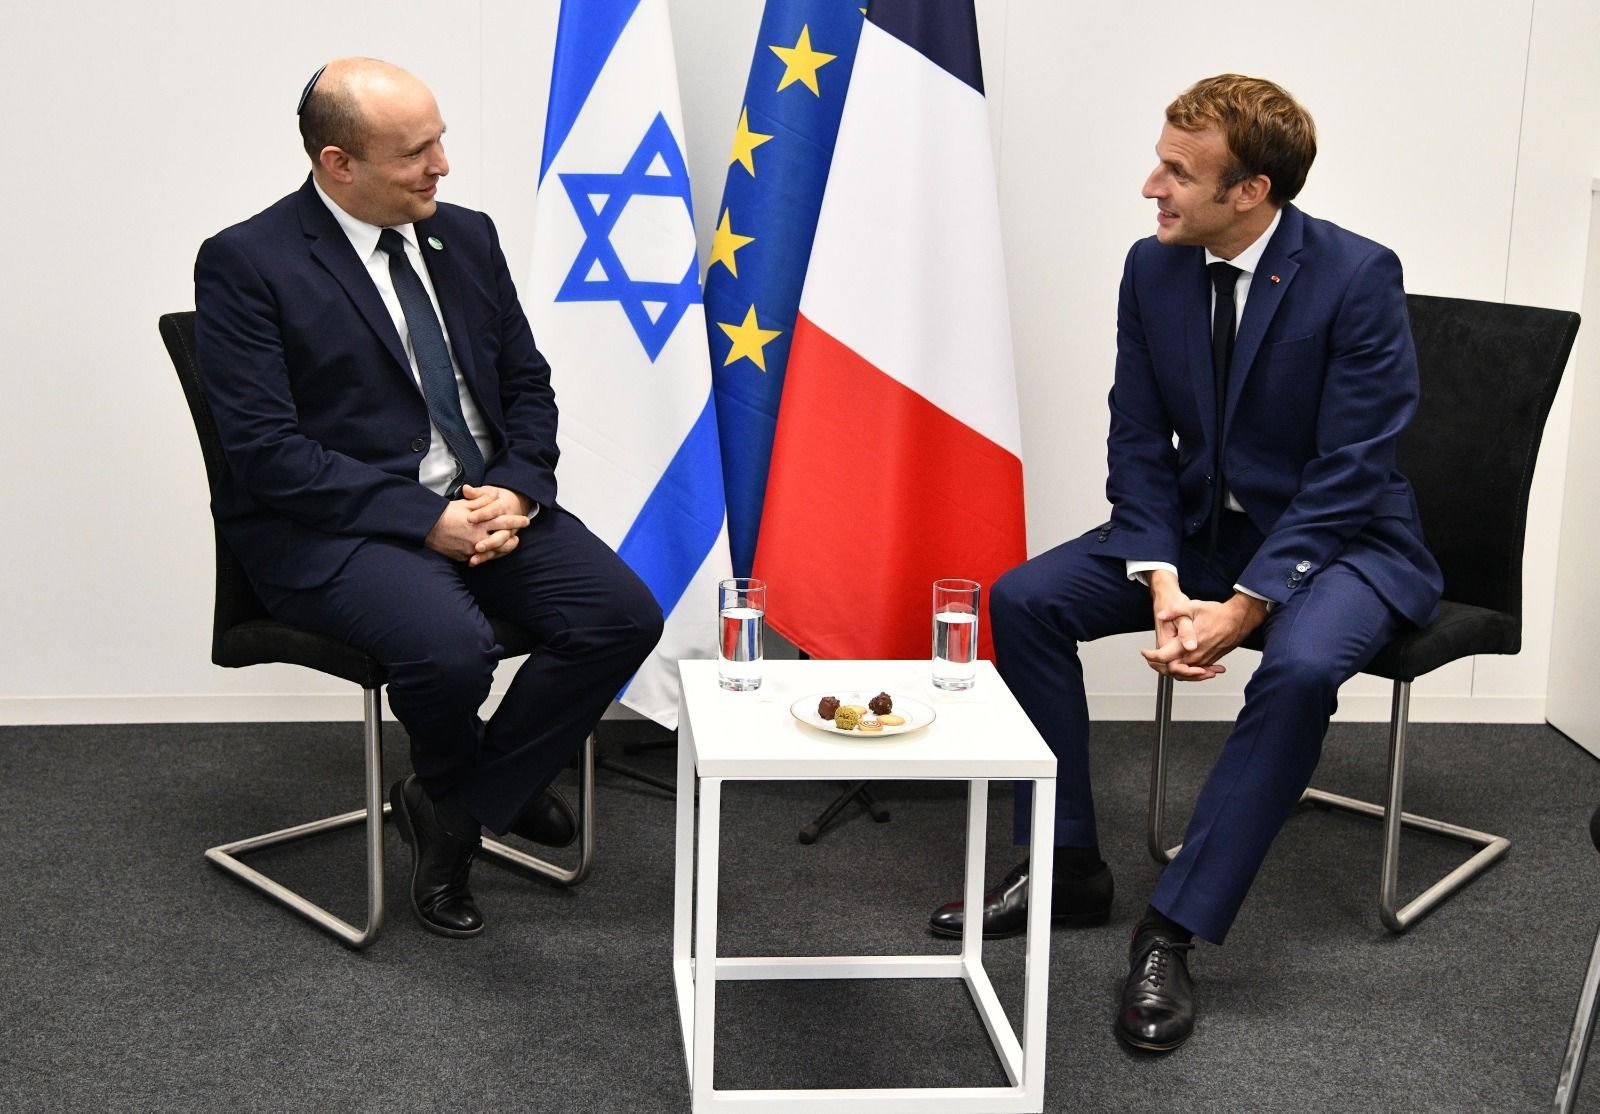 Israeli Prime Minister Naftali Bennett (L) and French President Emmanuel Macron meet on the margins of the COP26 conference in Glasgow, Scotland on Nov. 1, 2021 (AA Photo)